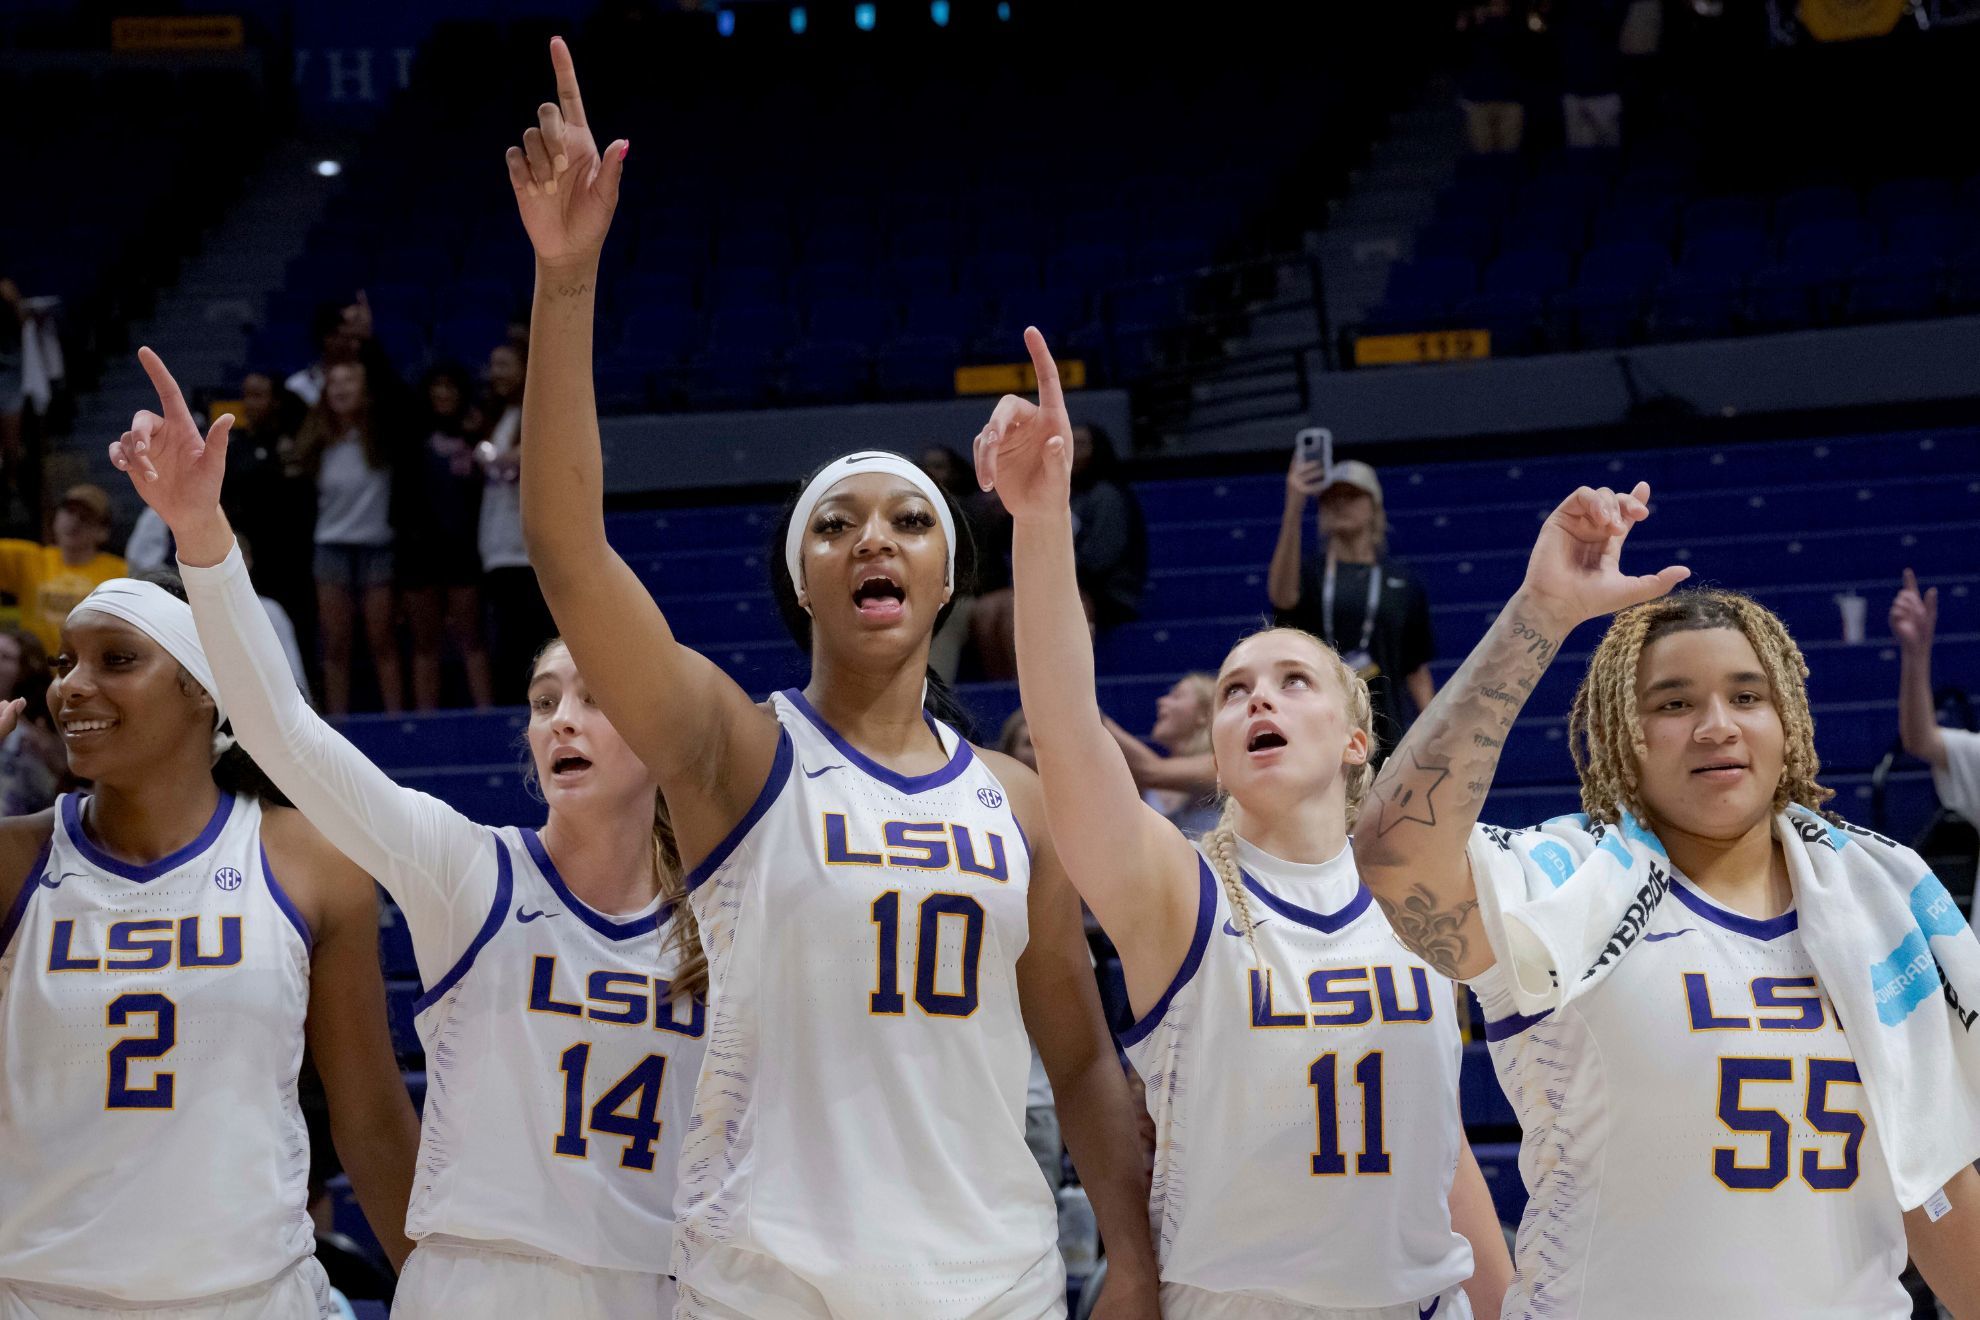 Angel Reese isn't the only missing LSU star and coach Kim Mulkey remains coy